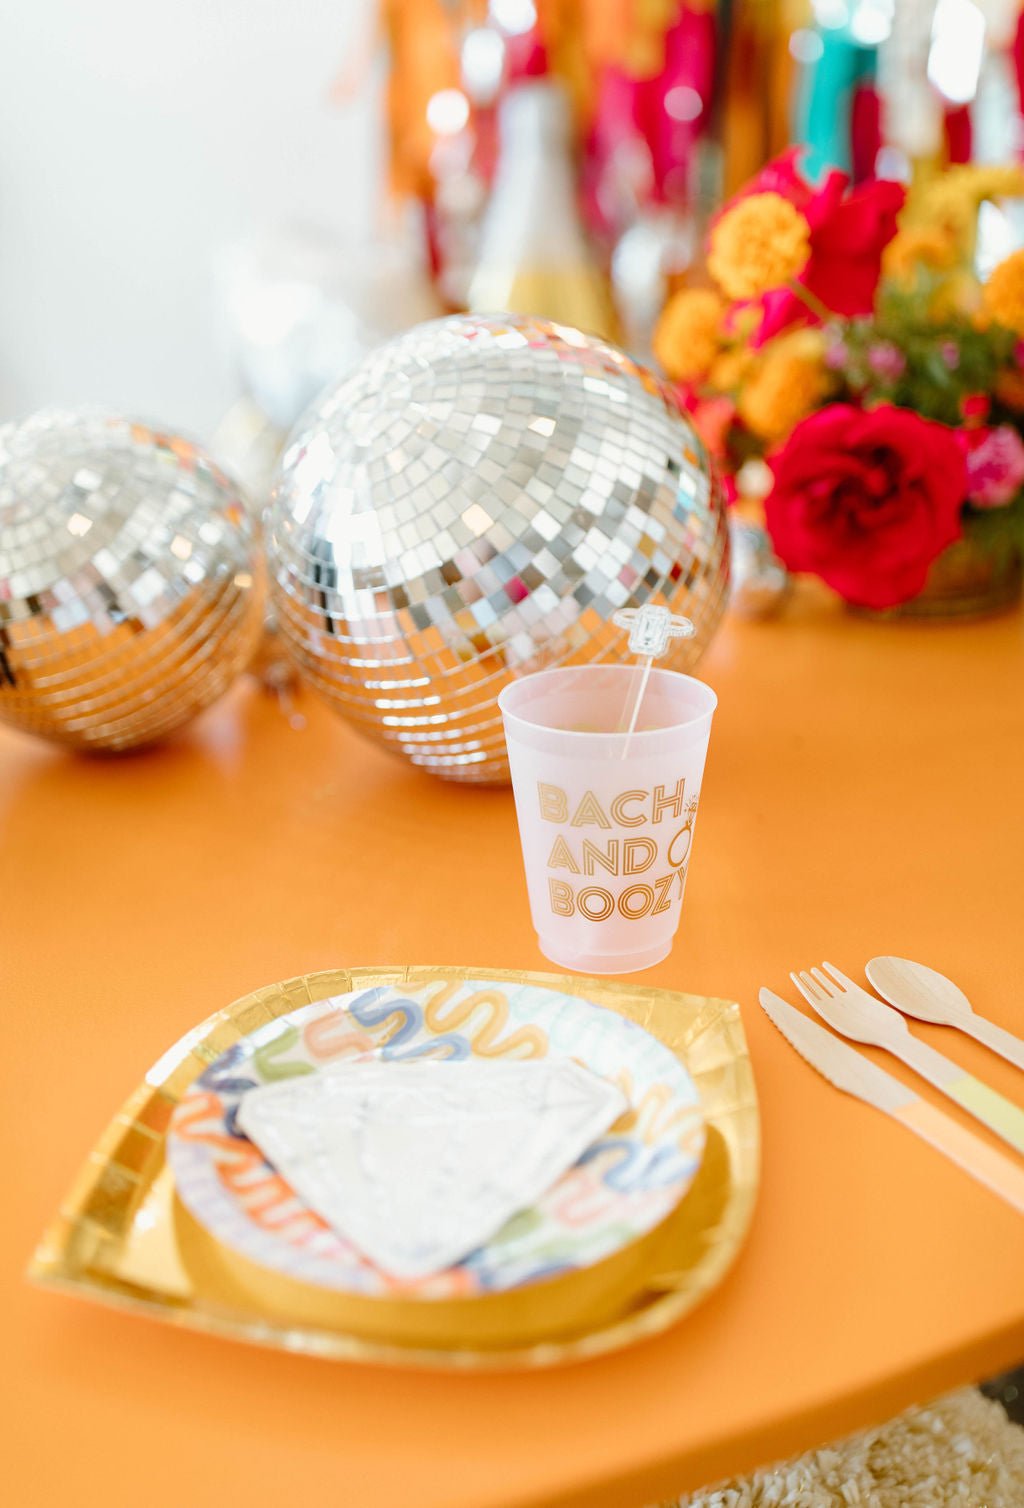 Wavy Lines Small Plate - Oh My Darling Party Co-70's partyFairepaper plates #Fringe_Backdrop#